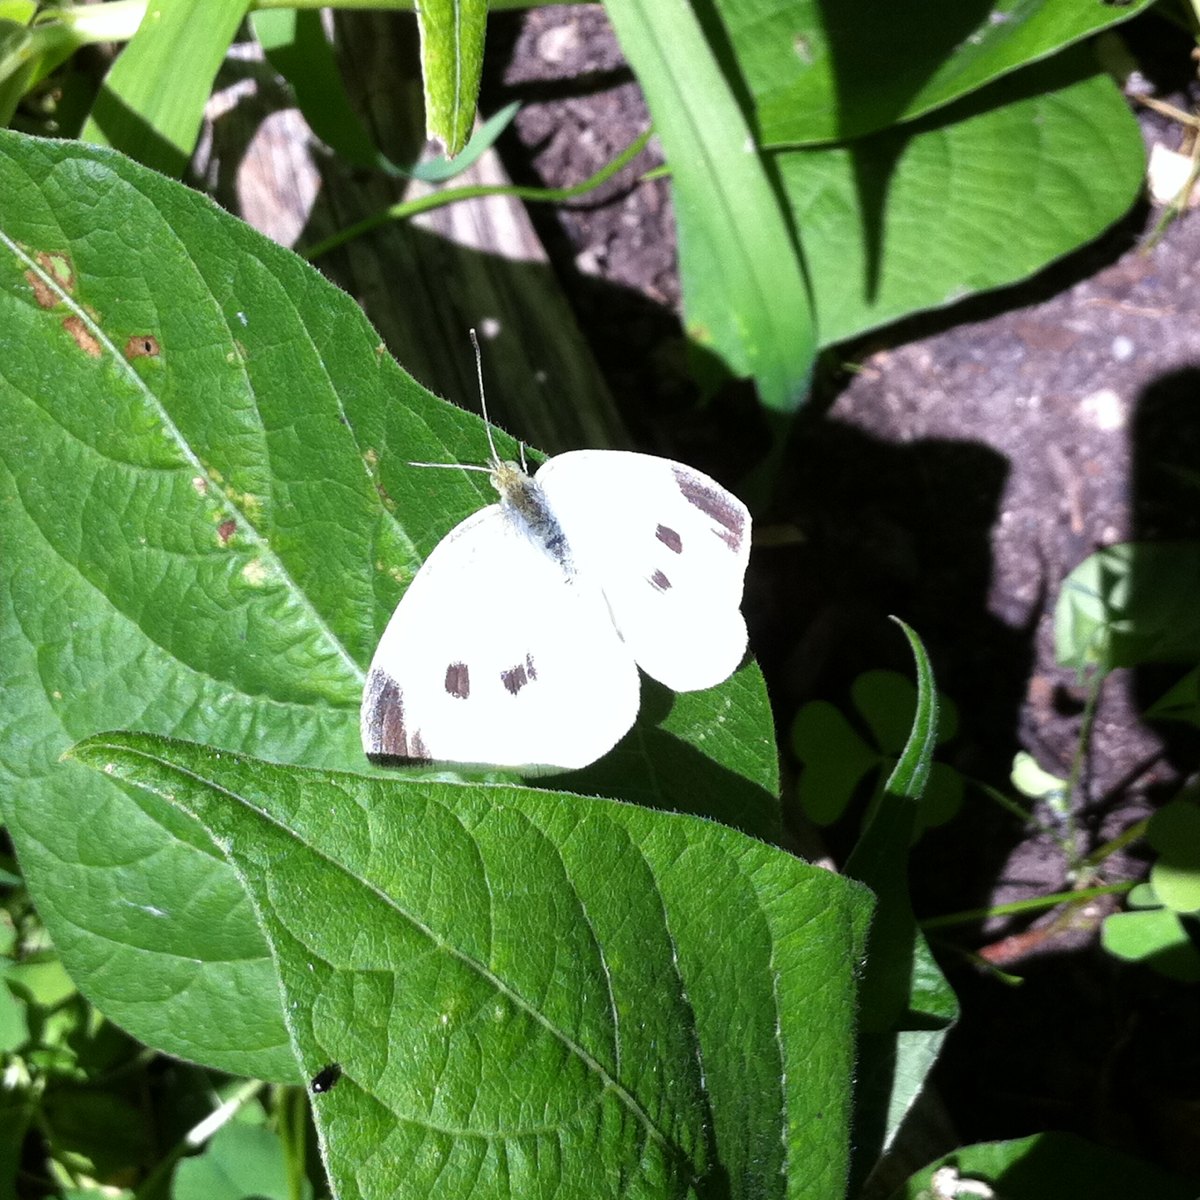 Cabbage White butterfly